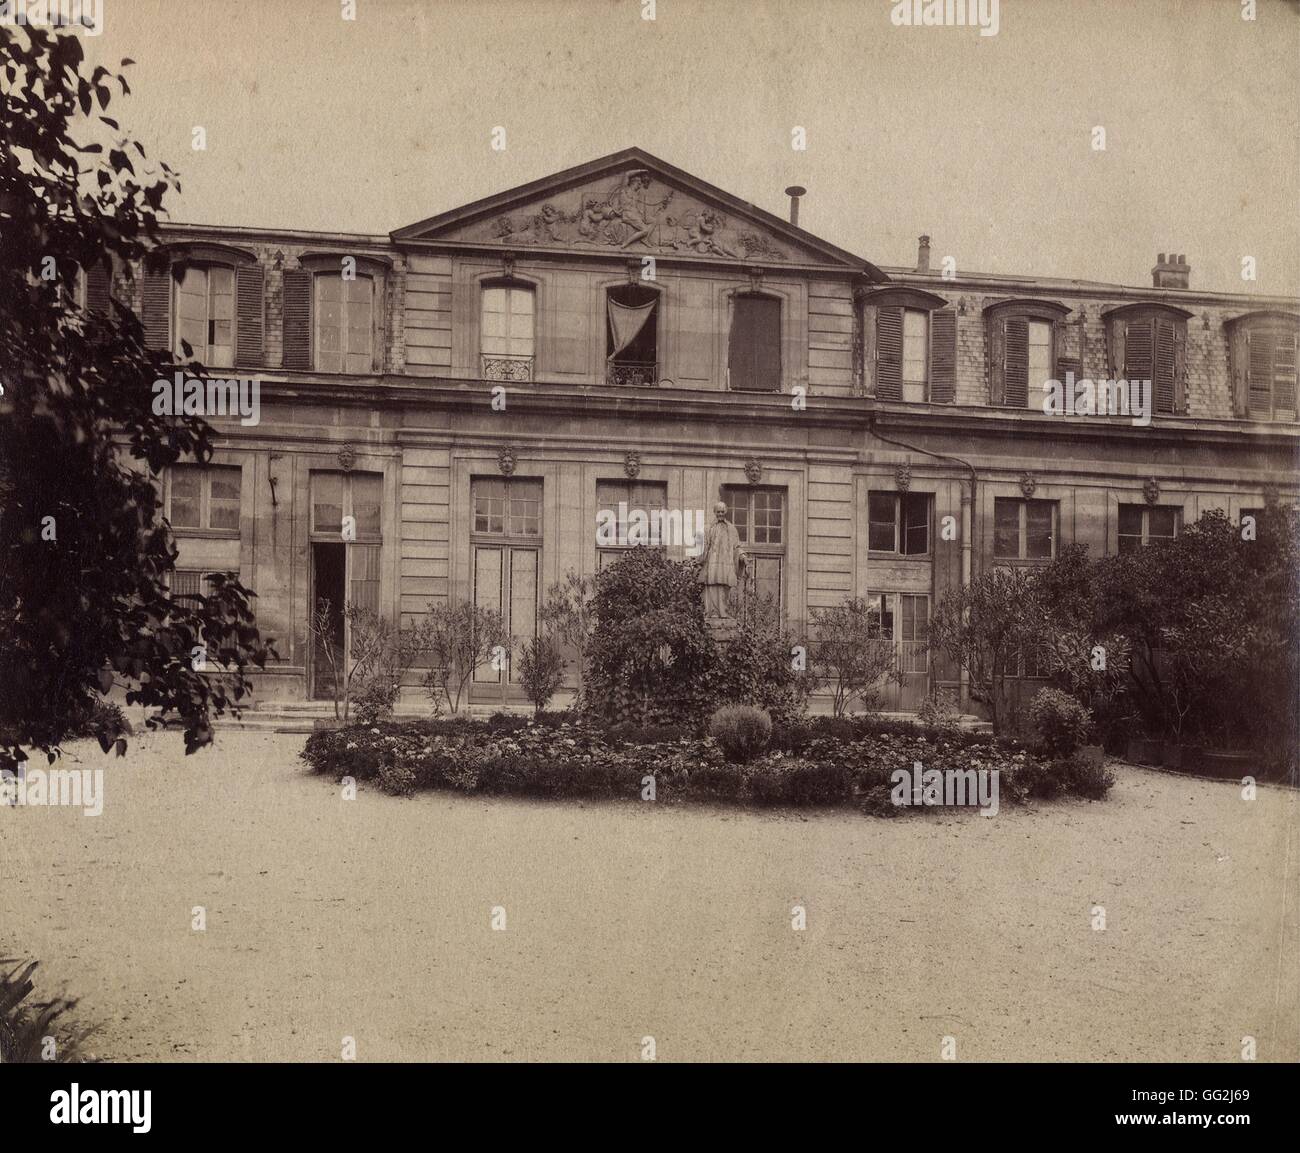 Eugène Atget Former hunting lodge (Jagdschloss) located 7 rue de Landy in Clichy-la-Garenne c.1900 Albumen print after glass-plate negative (17 x 21.7 cm) Private collection Stock Photo